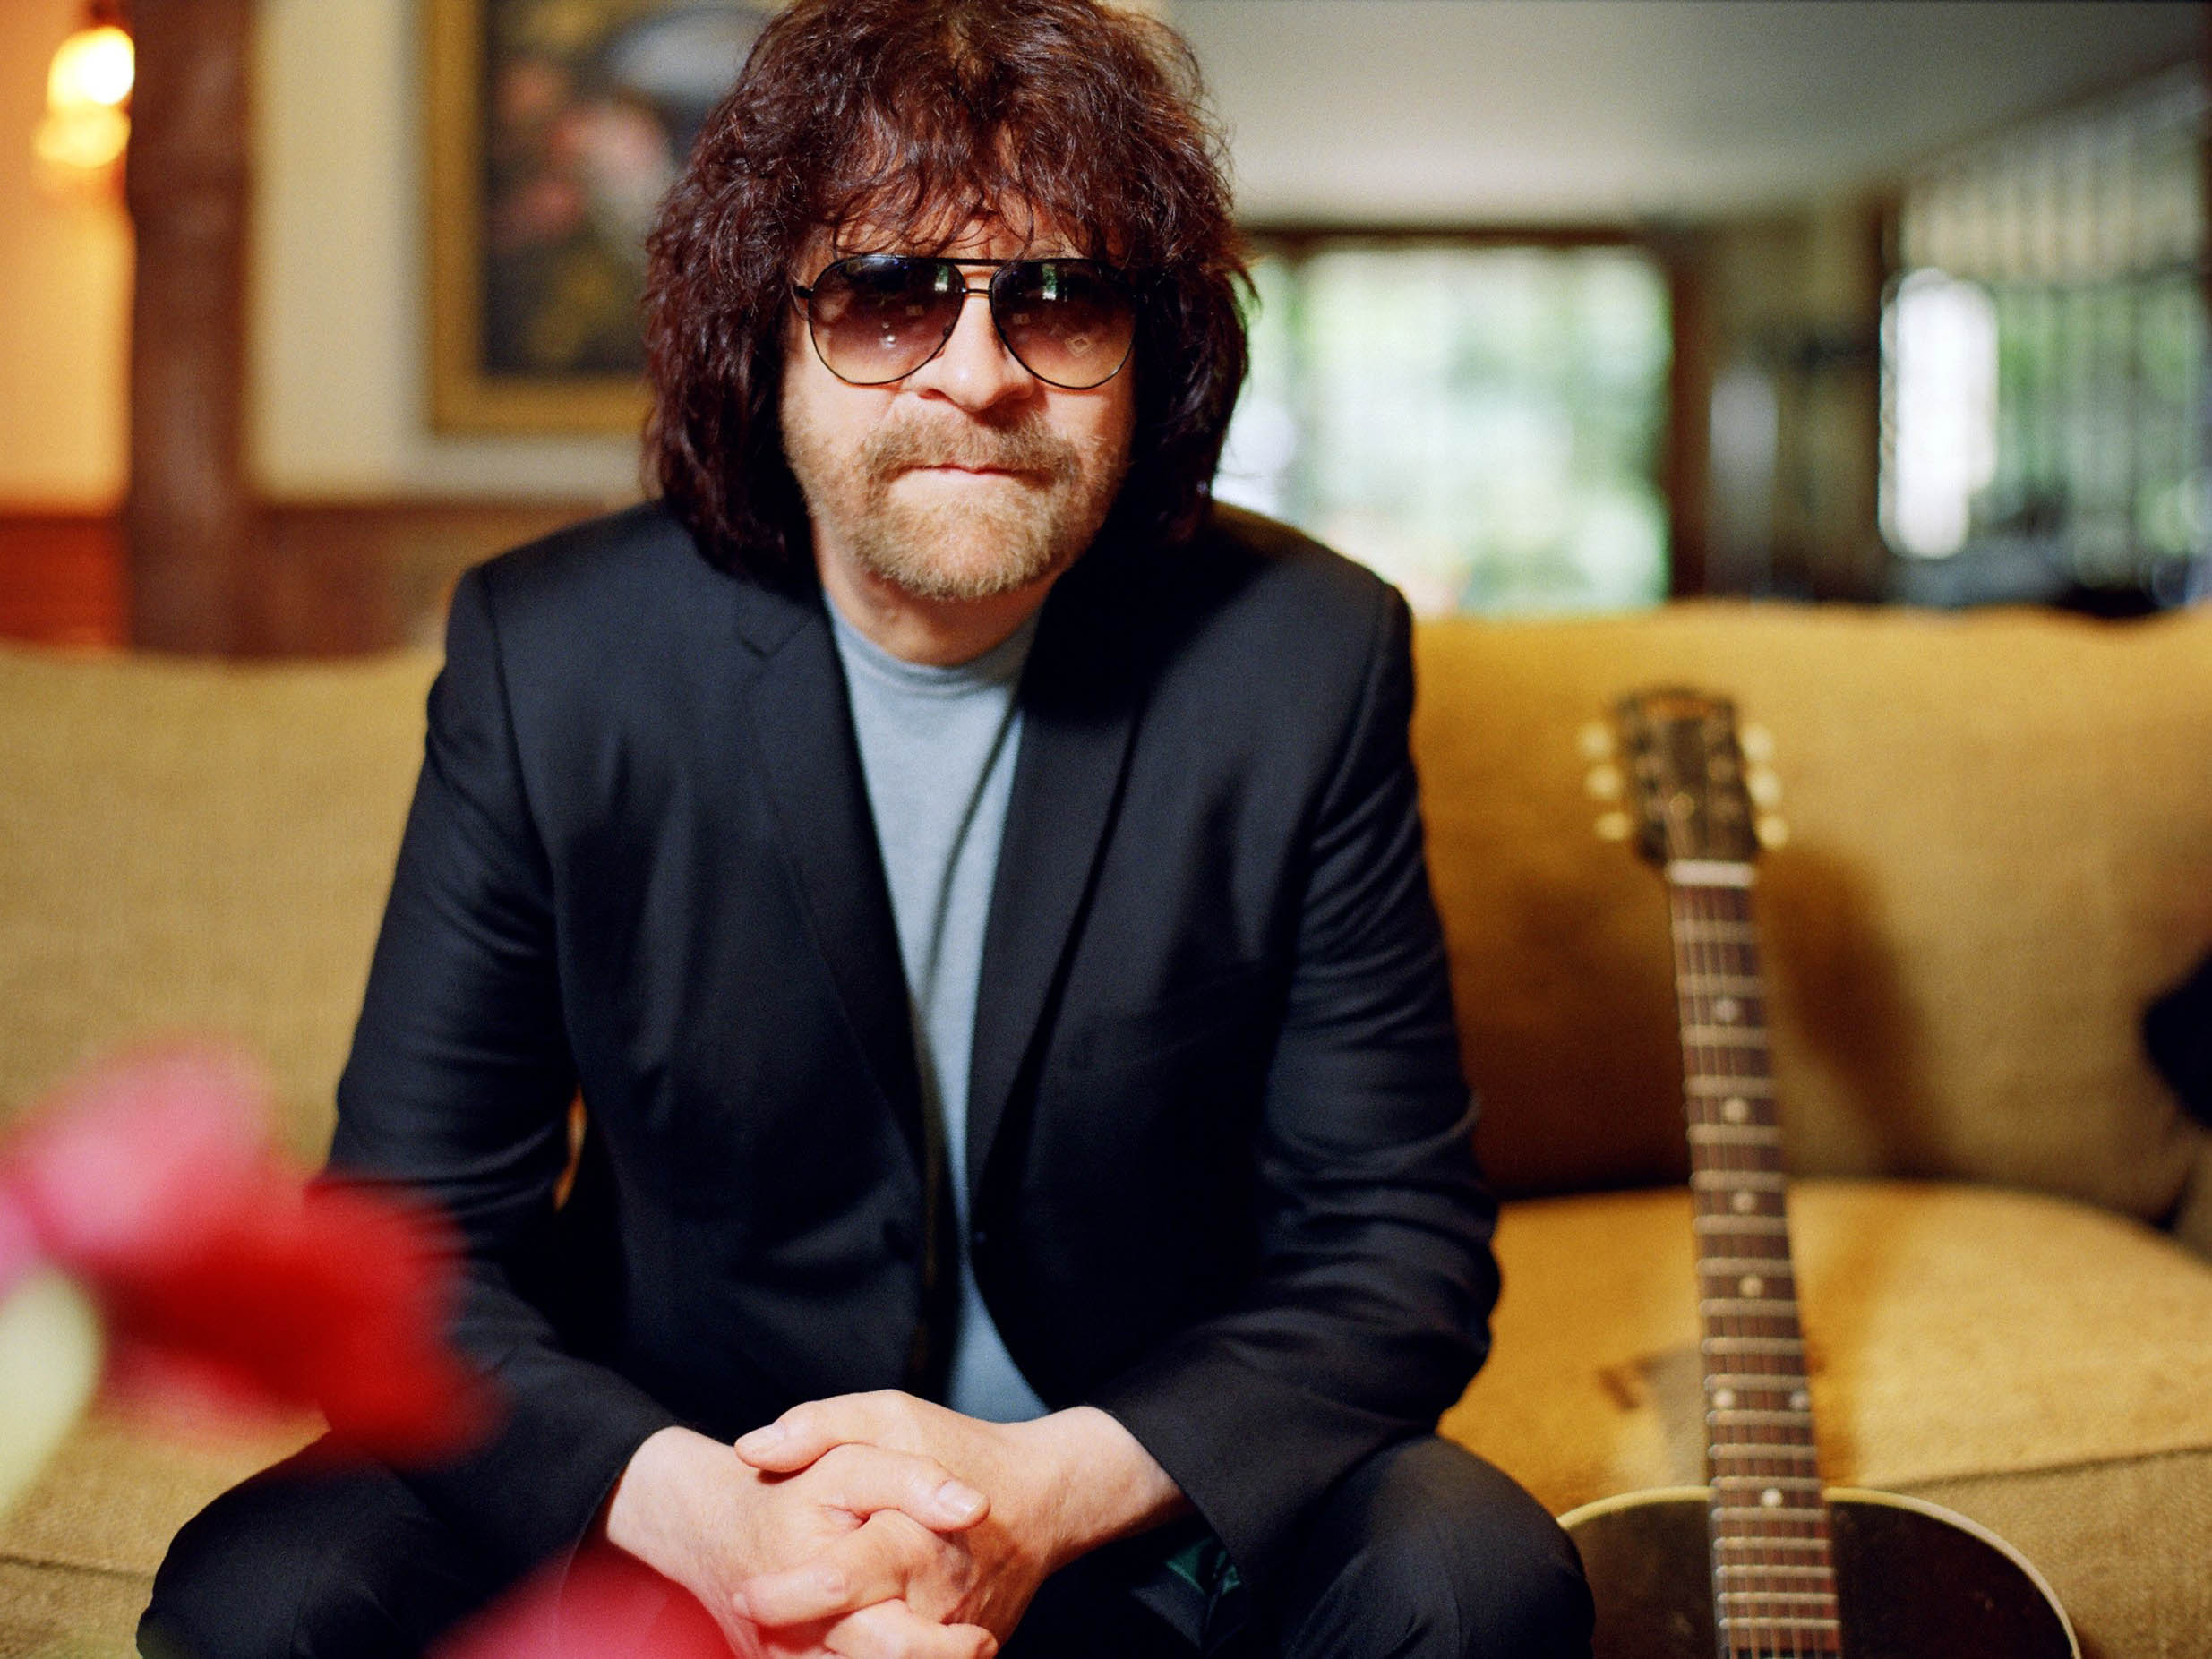 Jeff Lynne of the Electric Light Orchestra